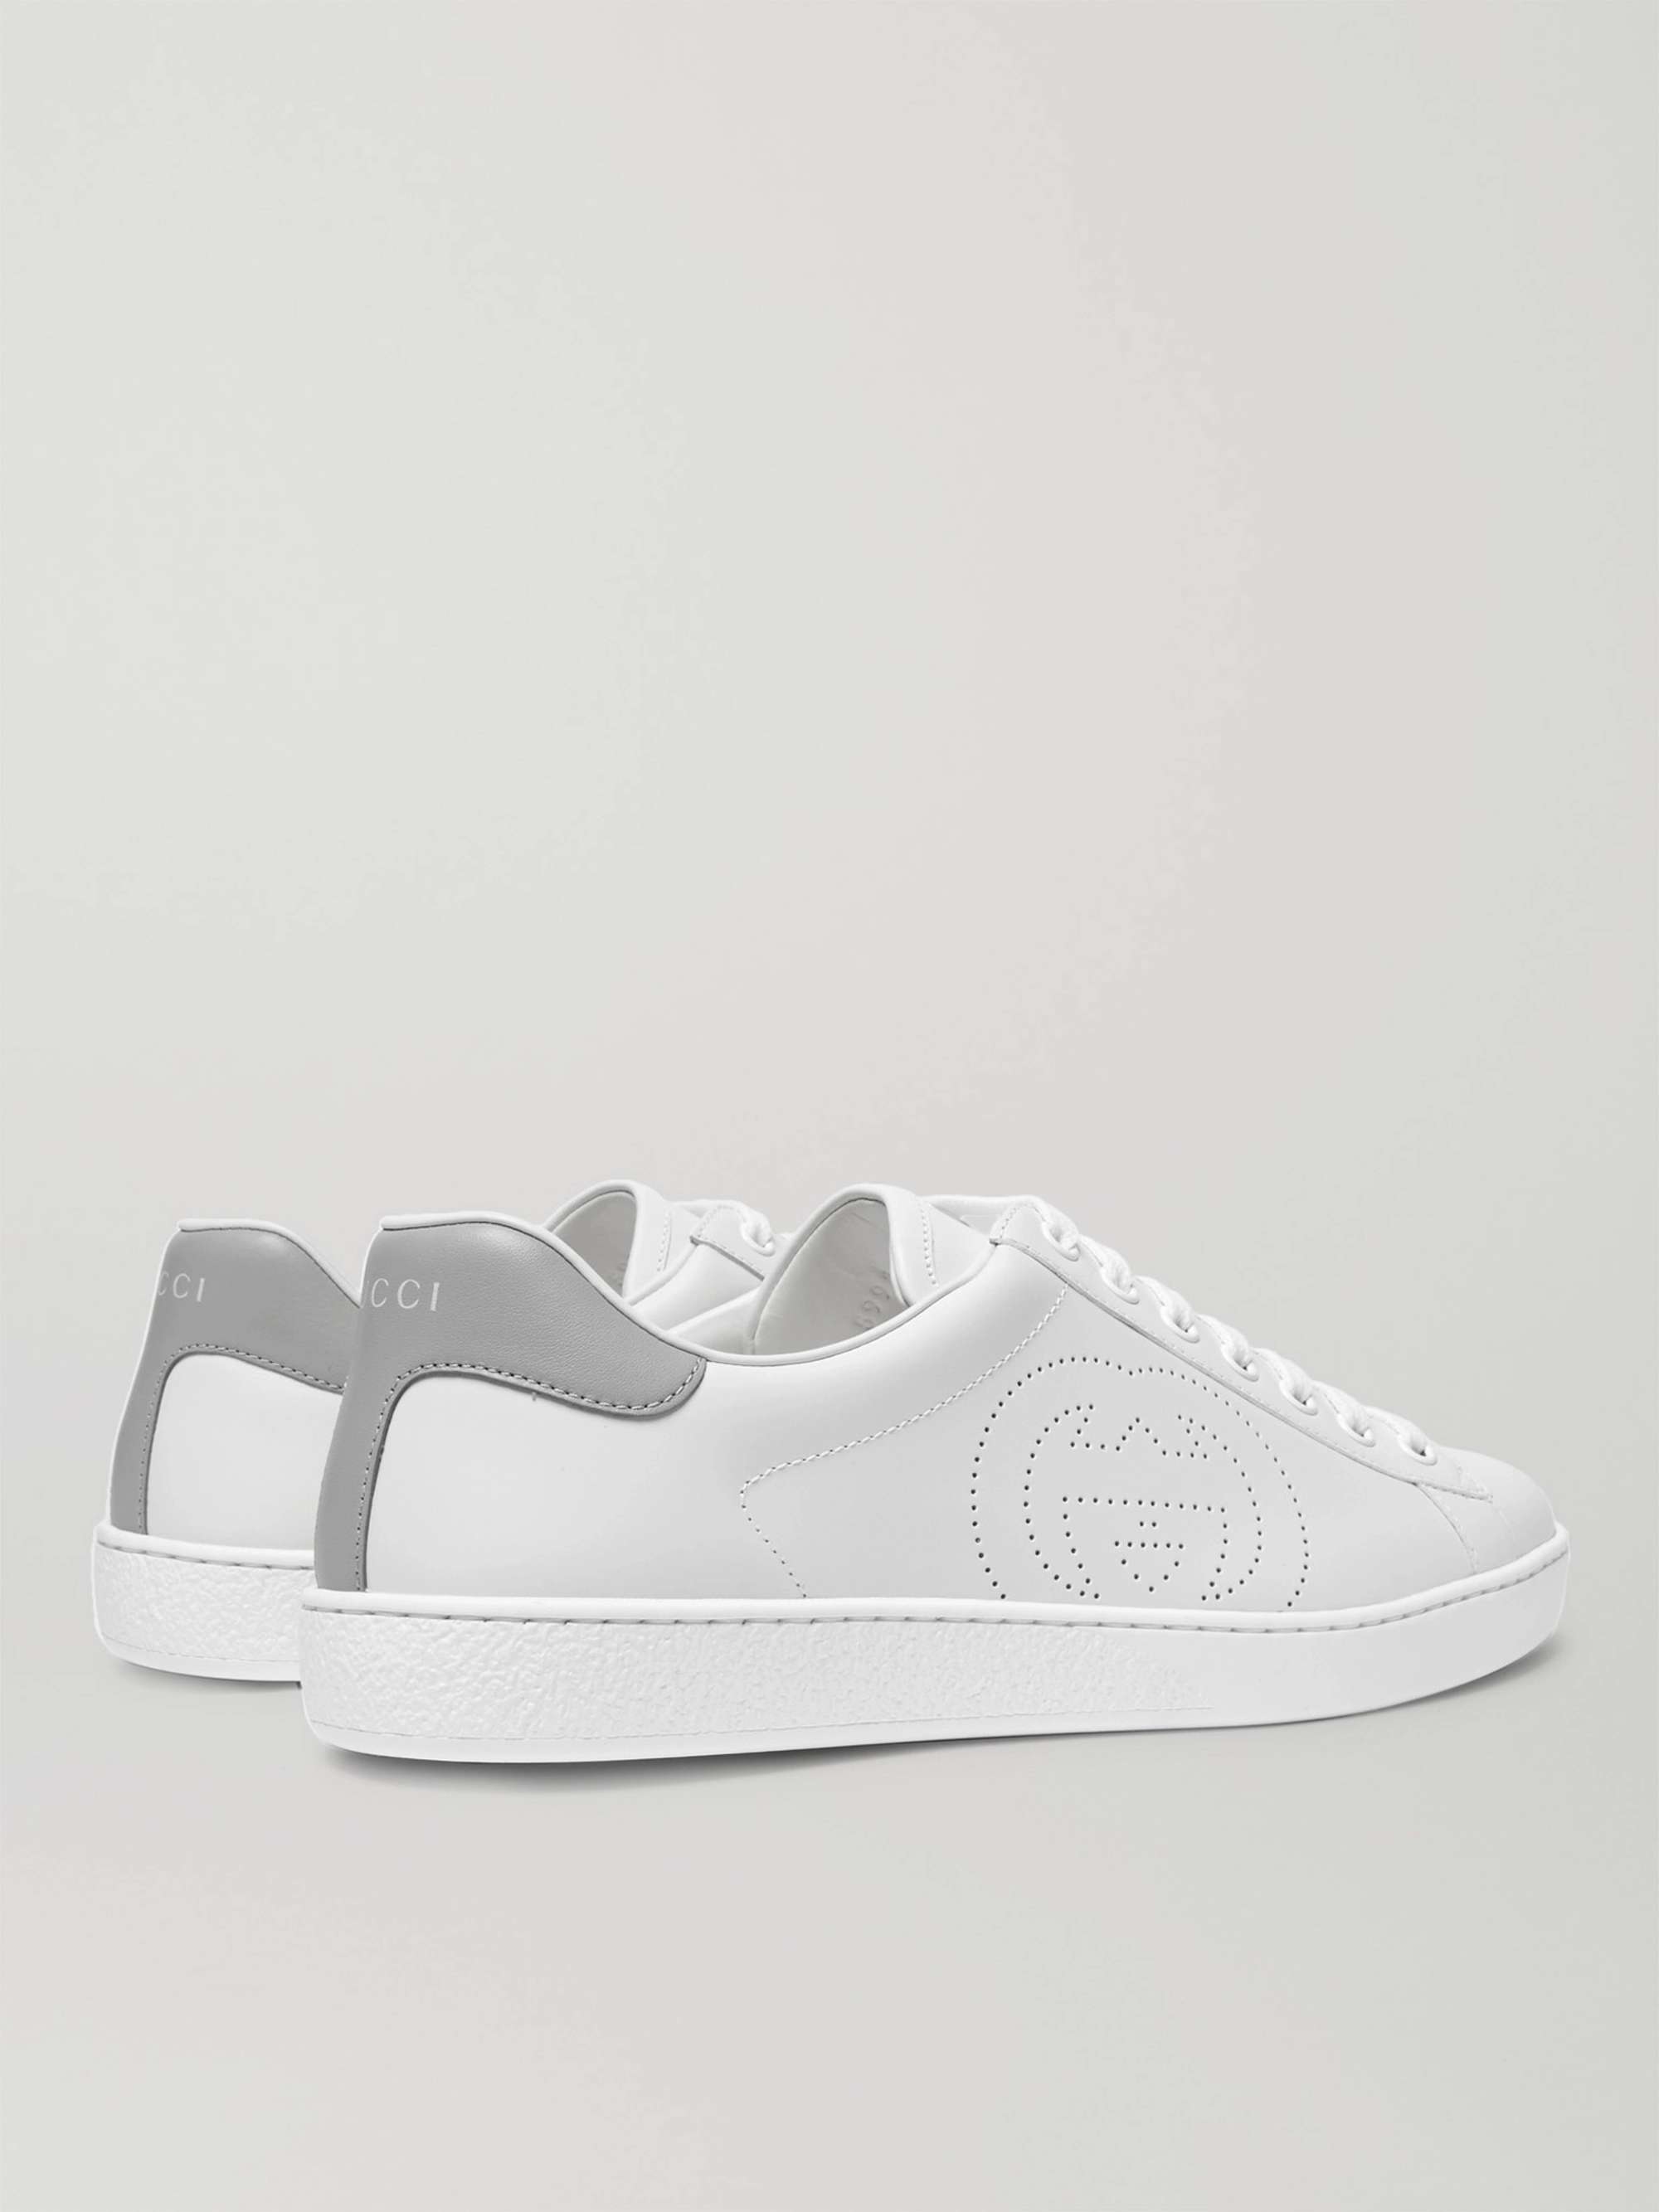 GUCCI New Ace Perforated Leather Sneakers